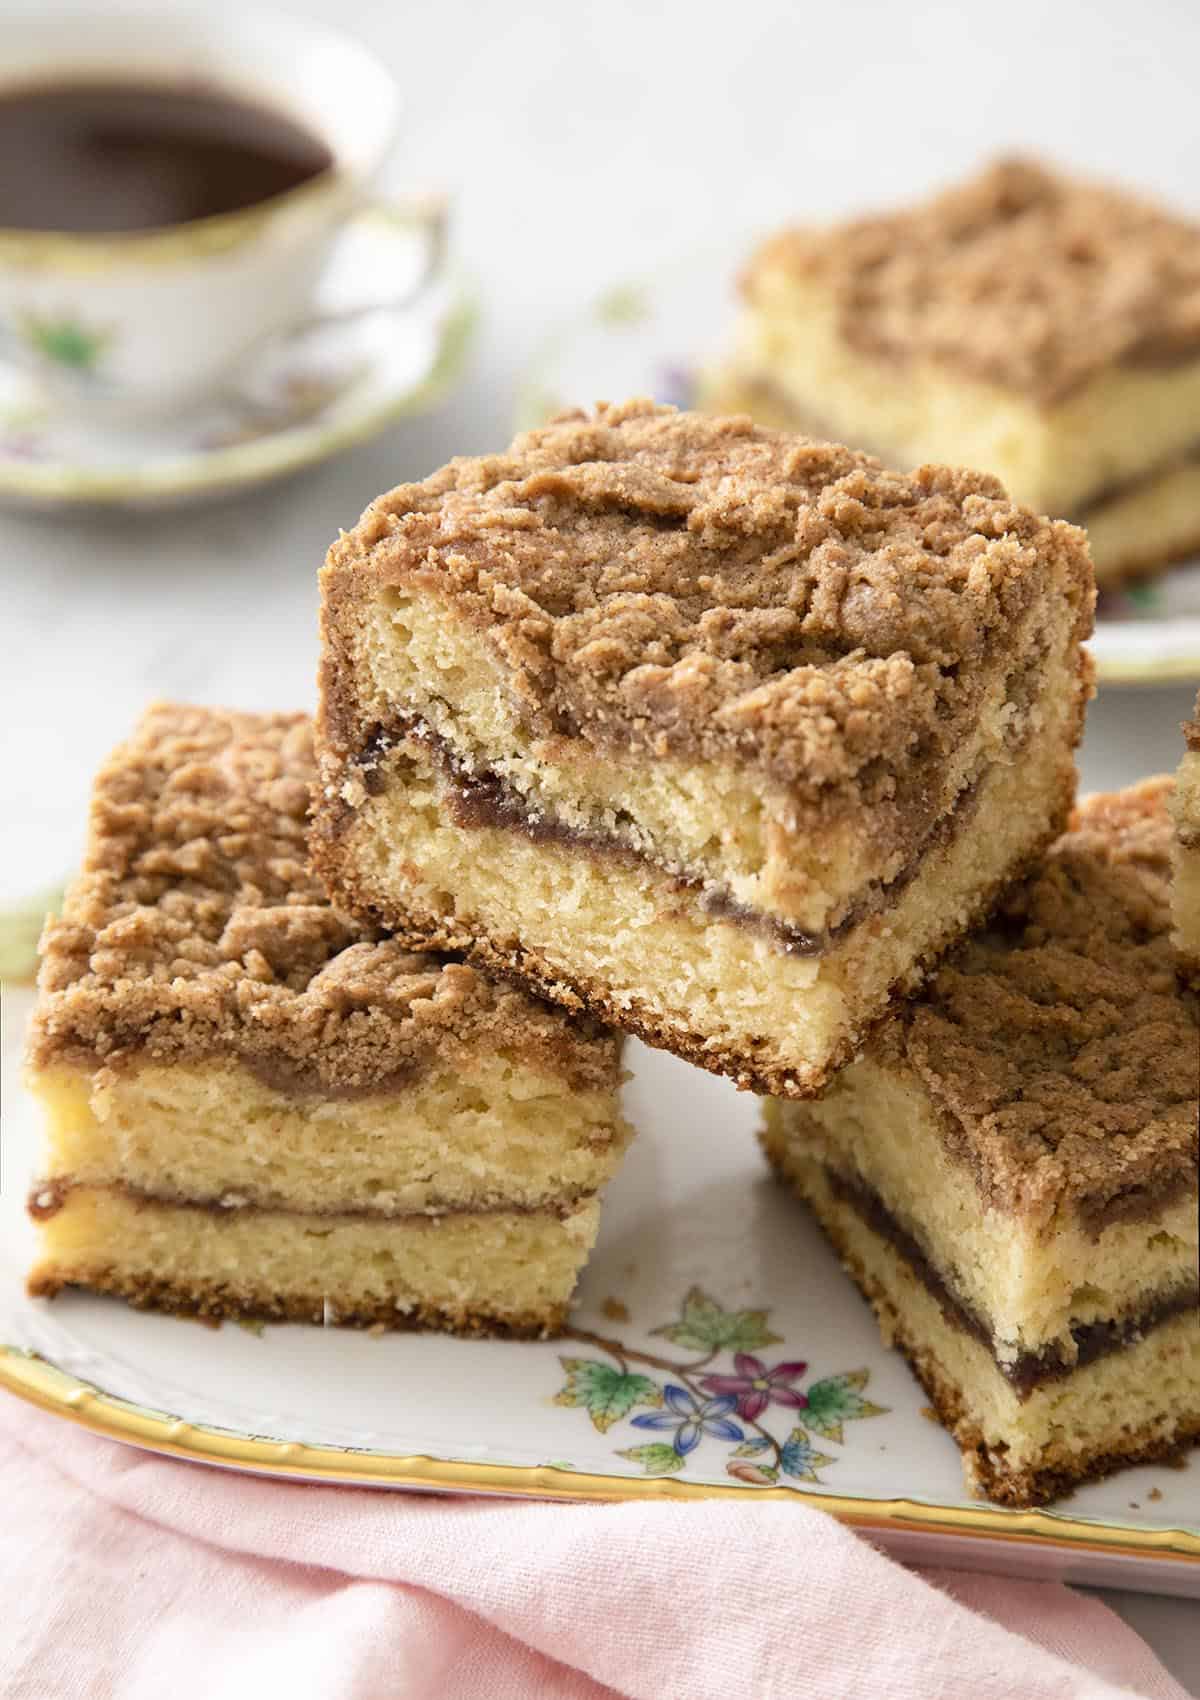 Pieces of coffee cake on a porcelain serving tray.